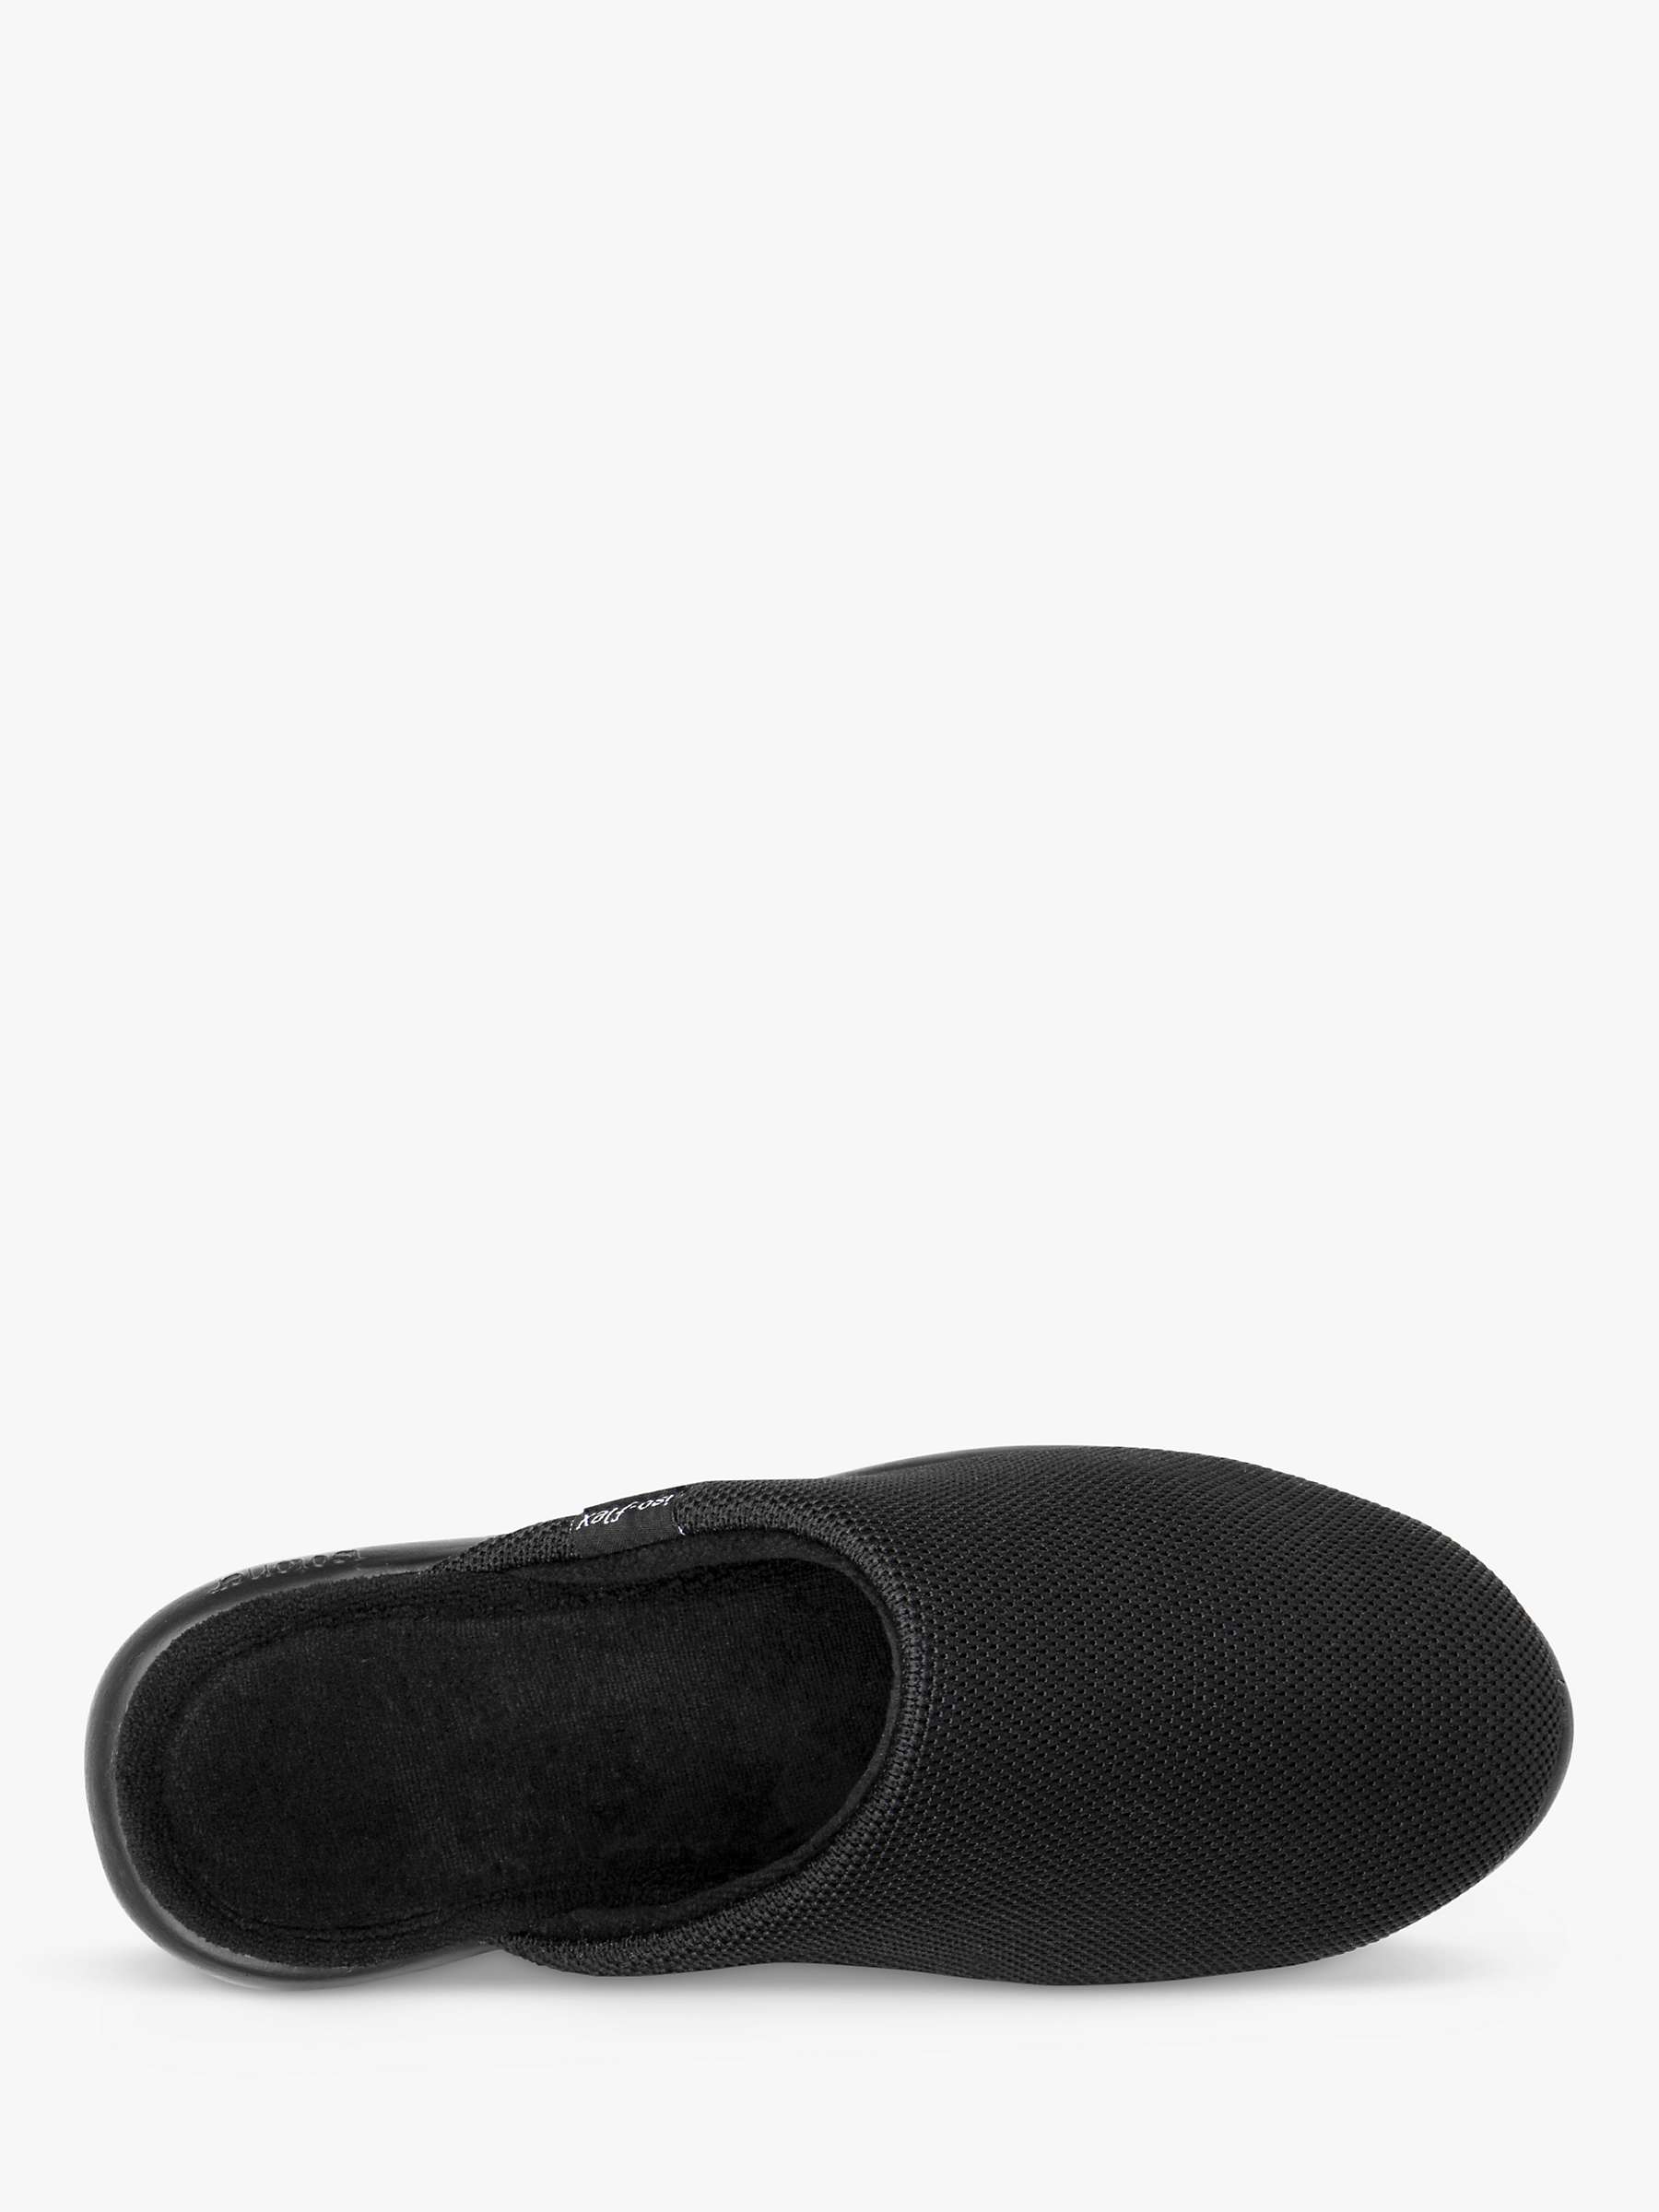 Buy totes Iso Flex Textured Mule Slippers, Black Online at johnlewis.com